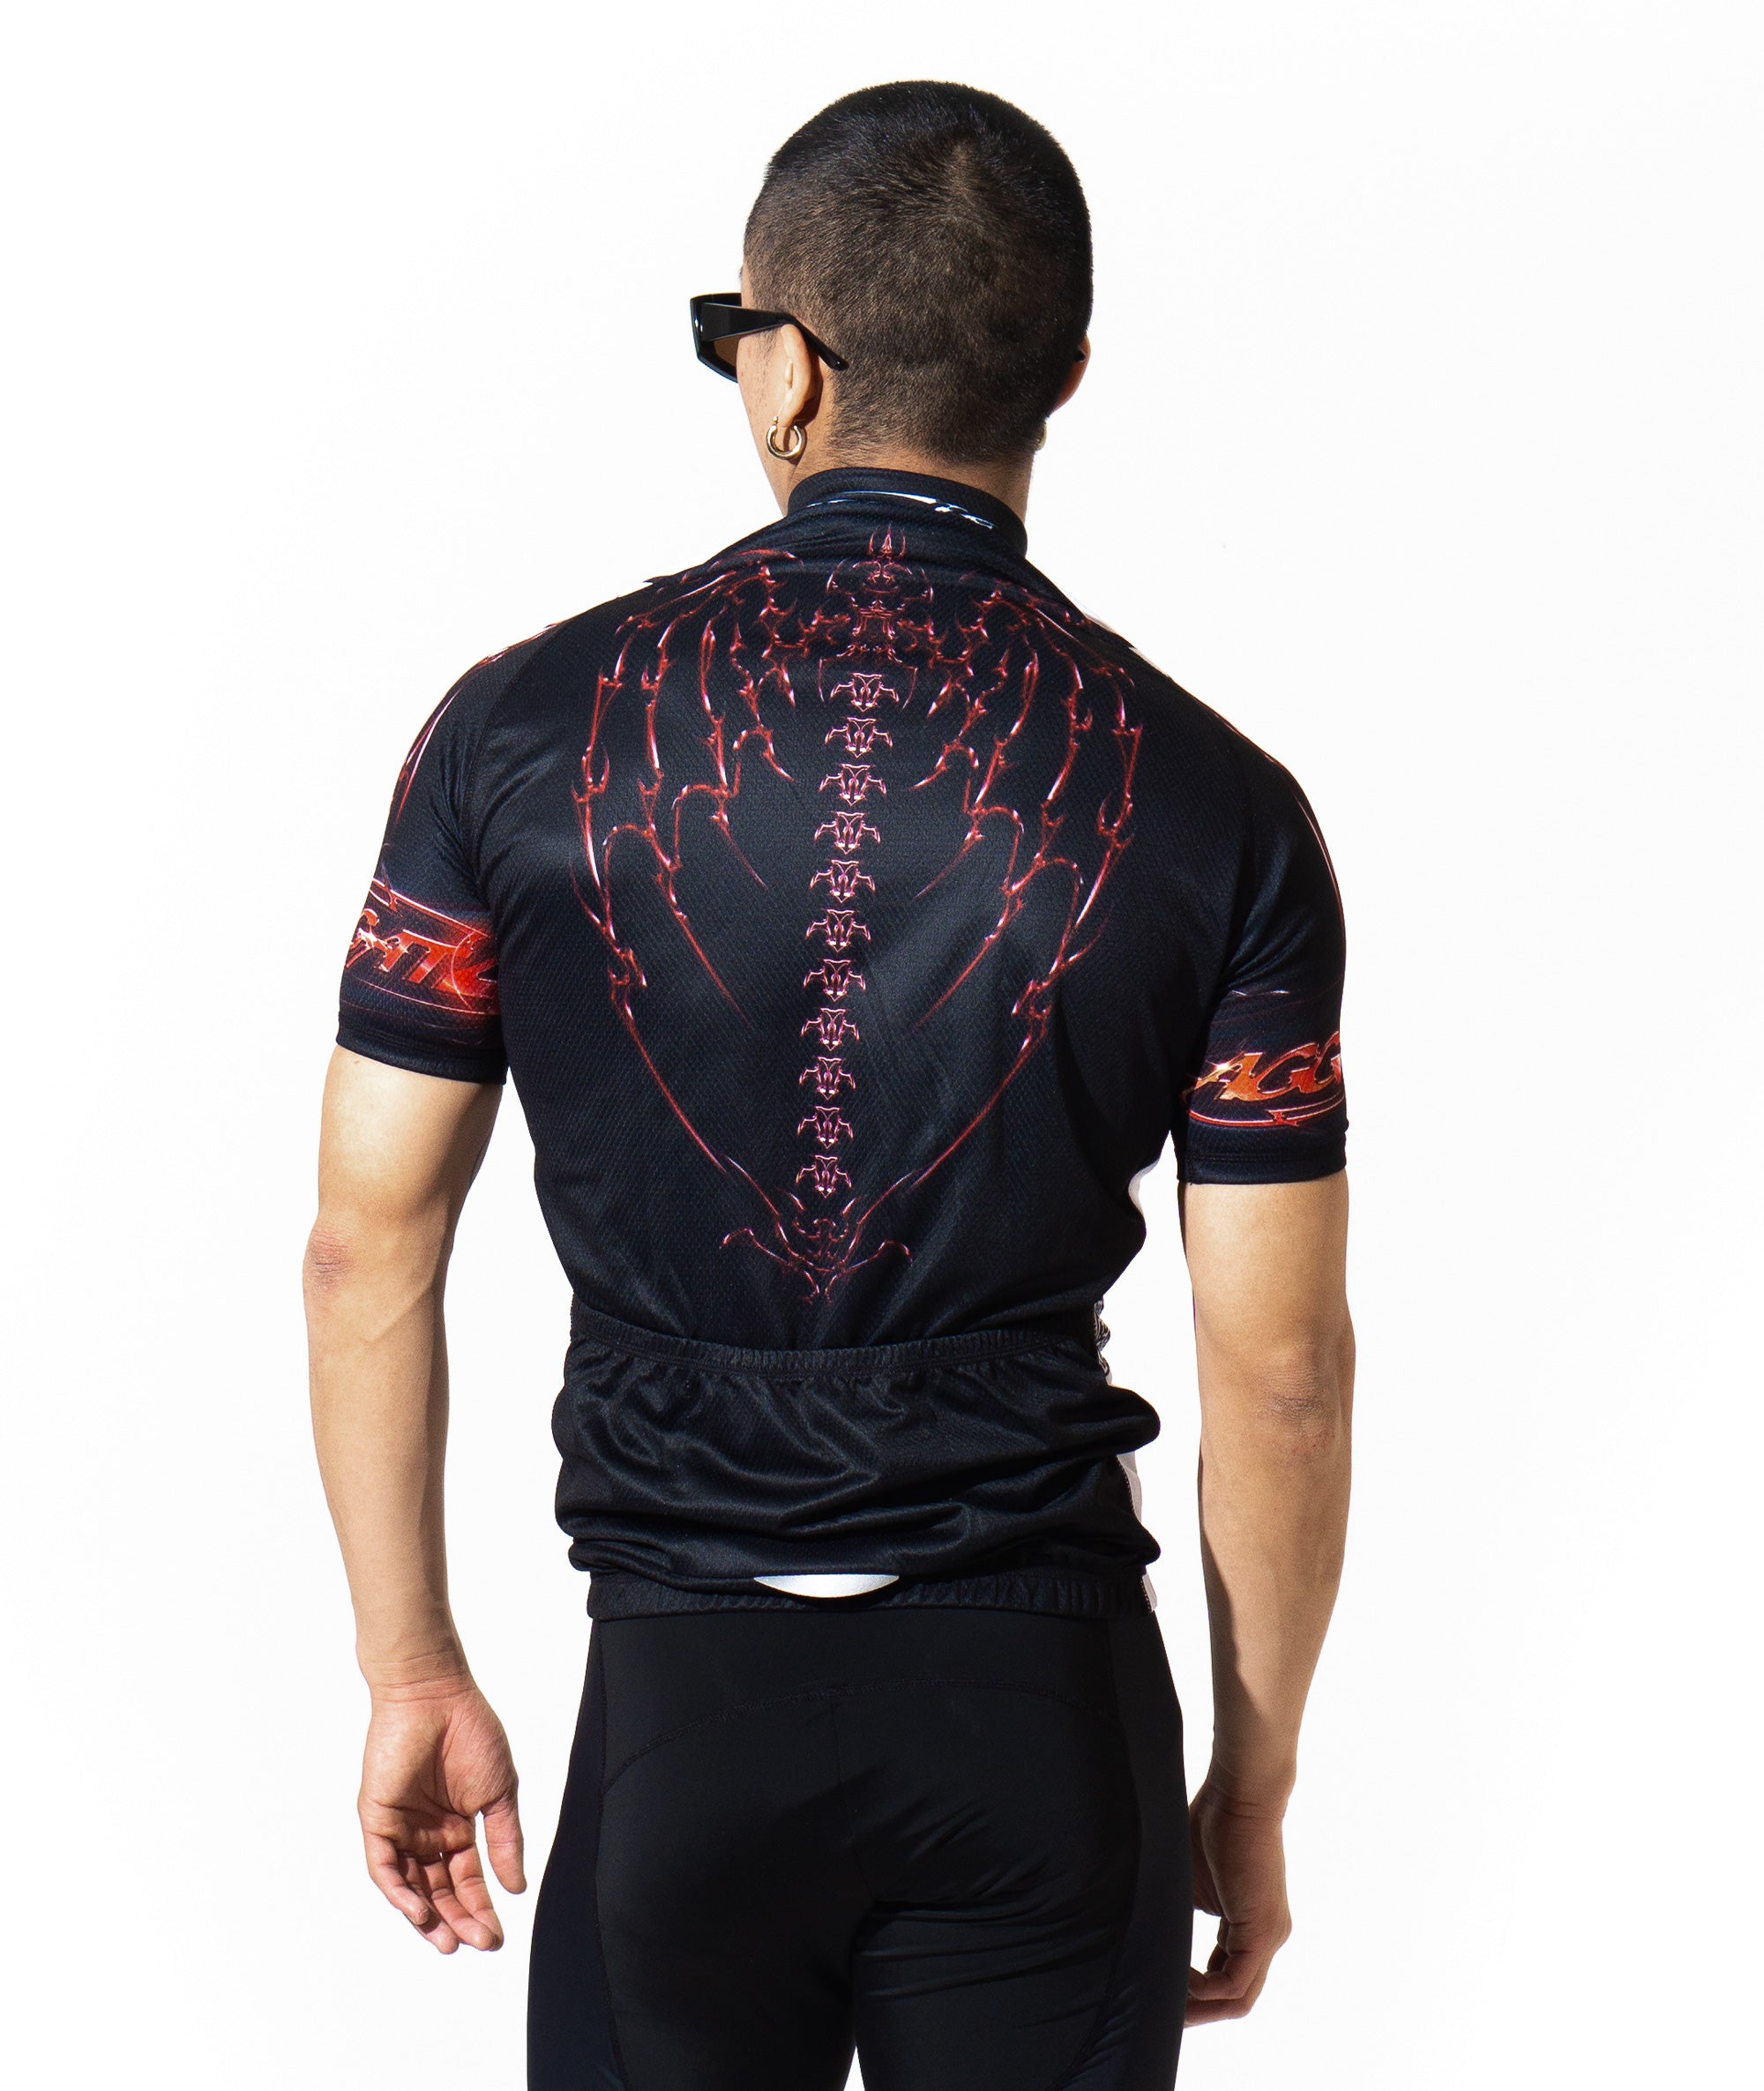 Ravemore_Cycling_Top_spine